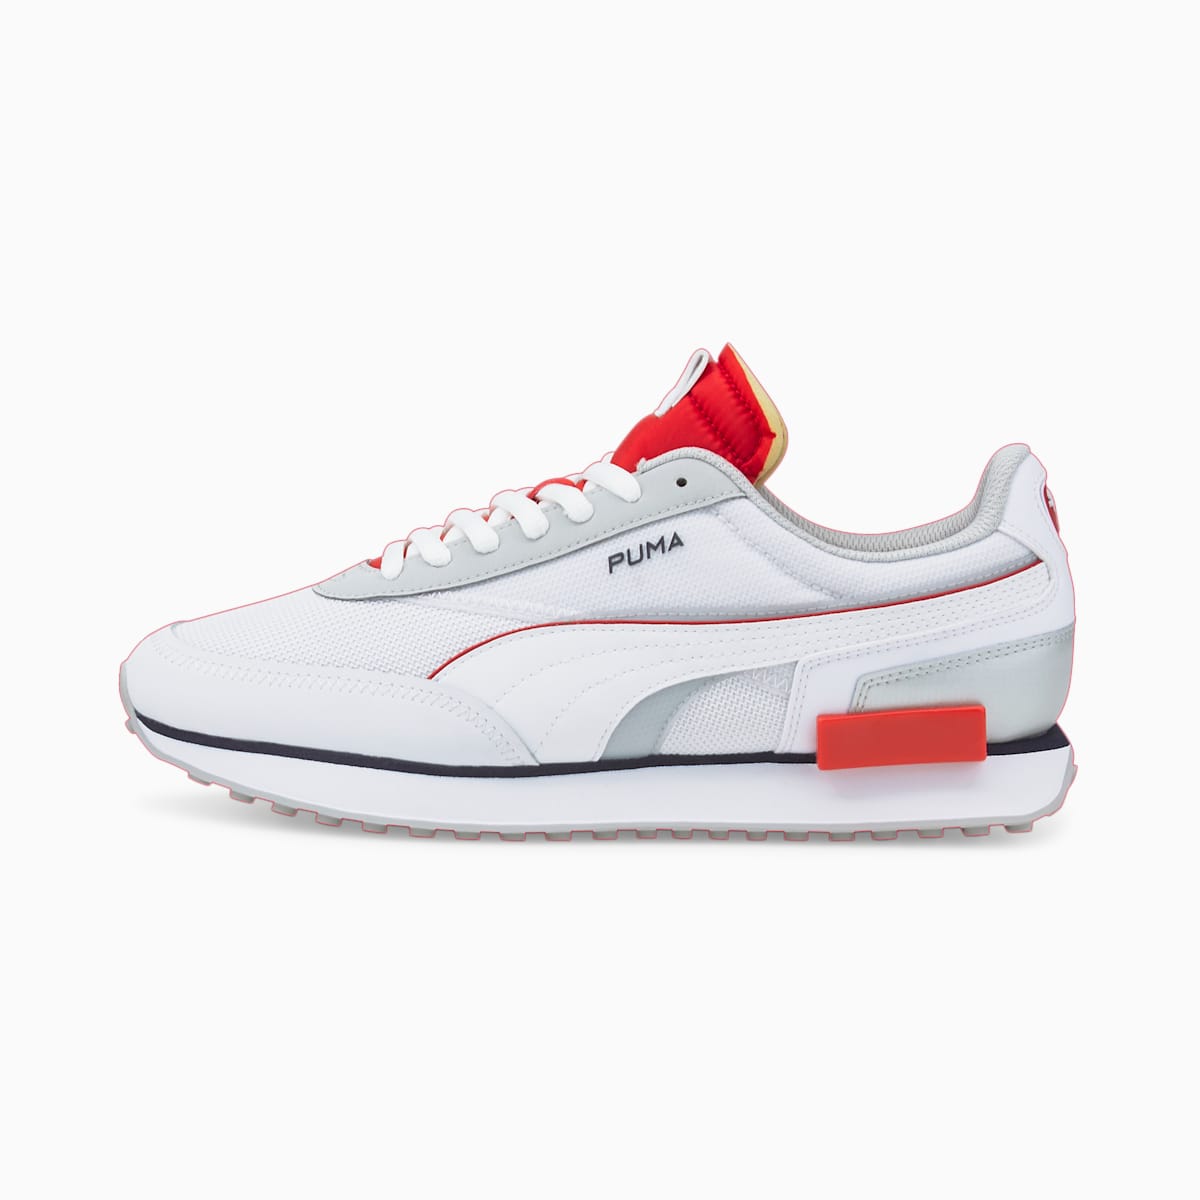 Tenis Puma Outlet Mexico - Future Rider Double Tech Mujer Blancos Rojos